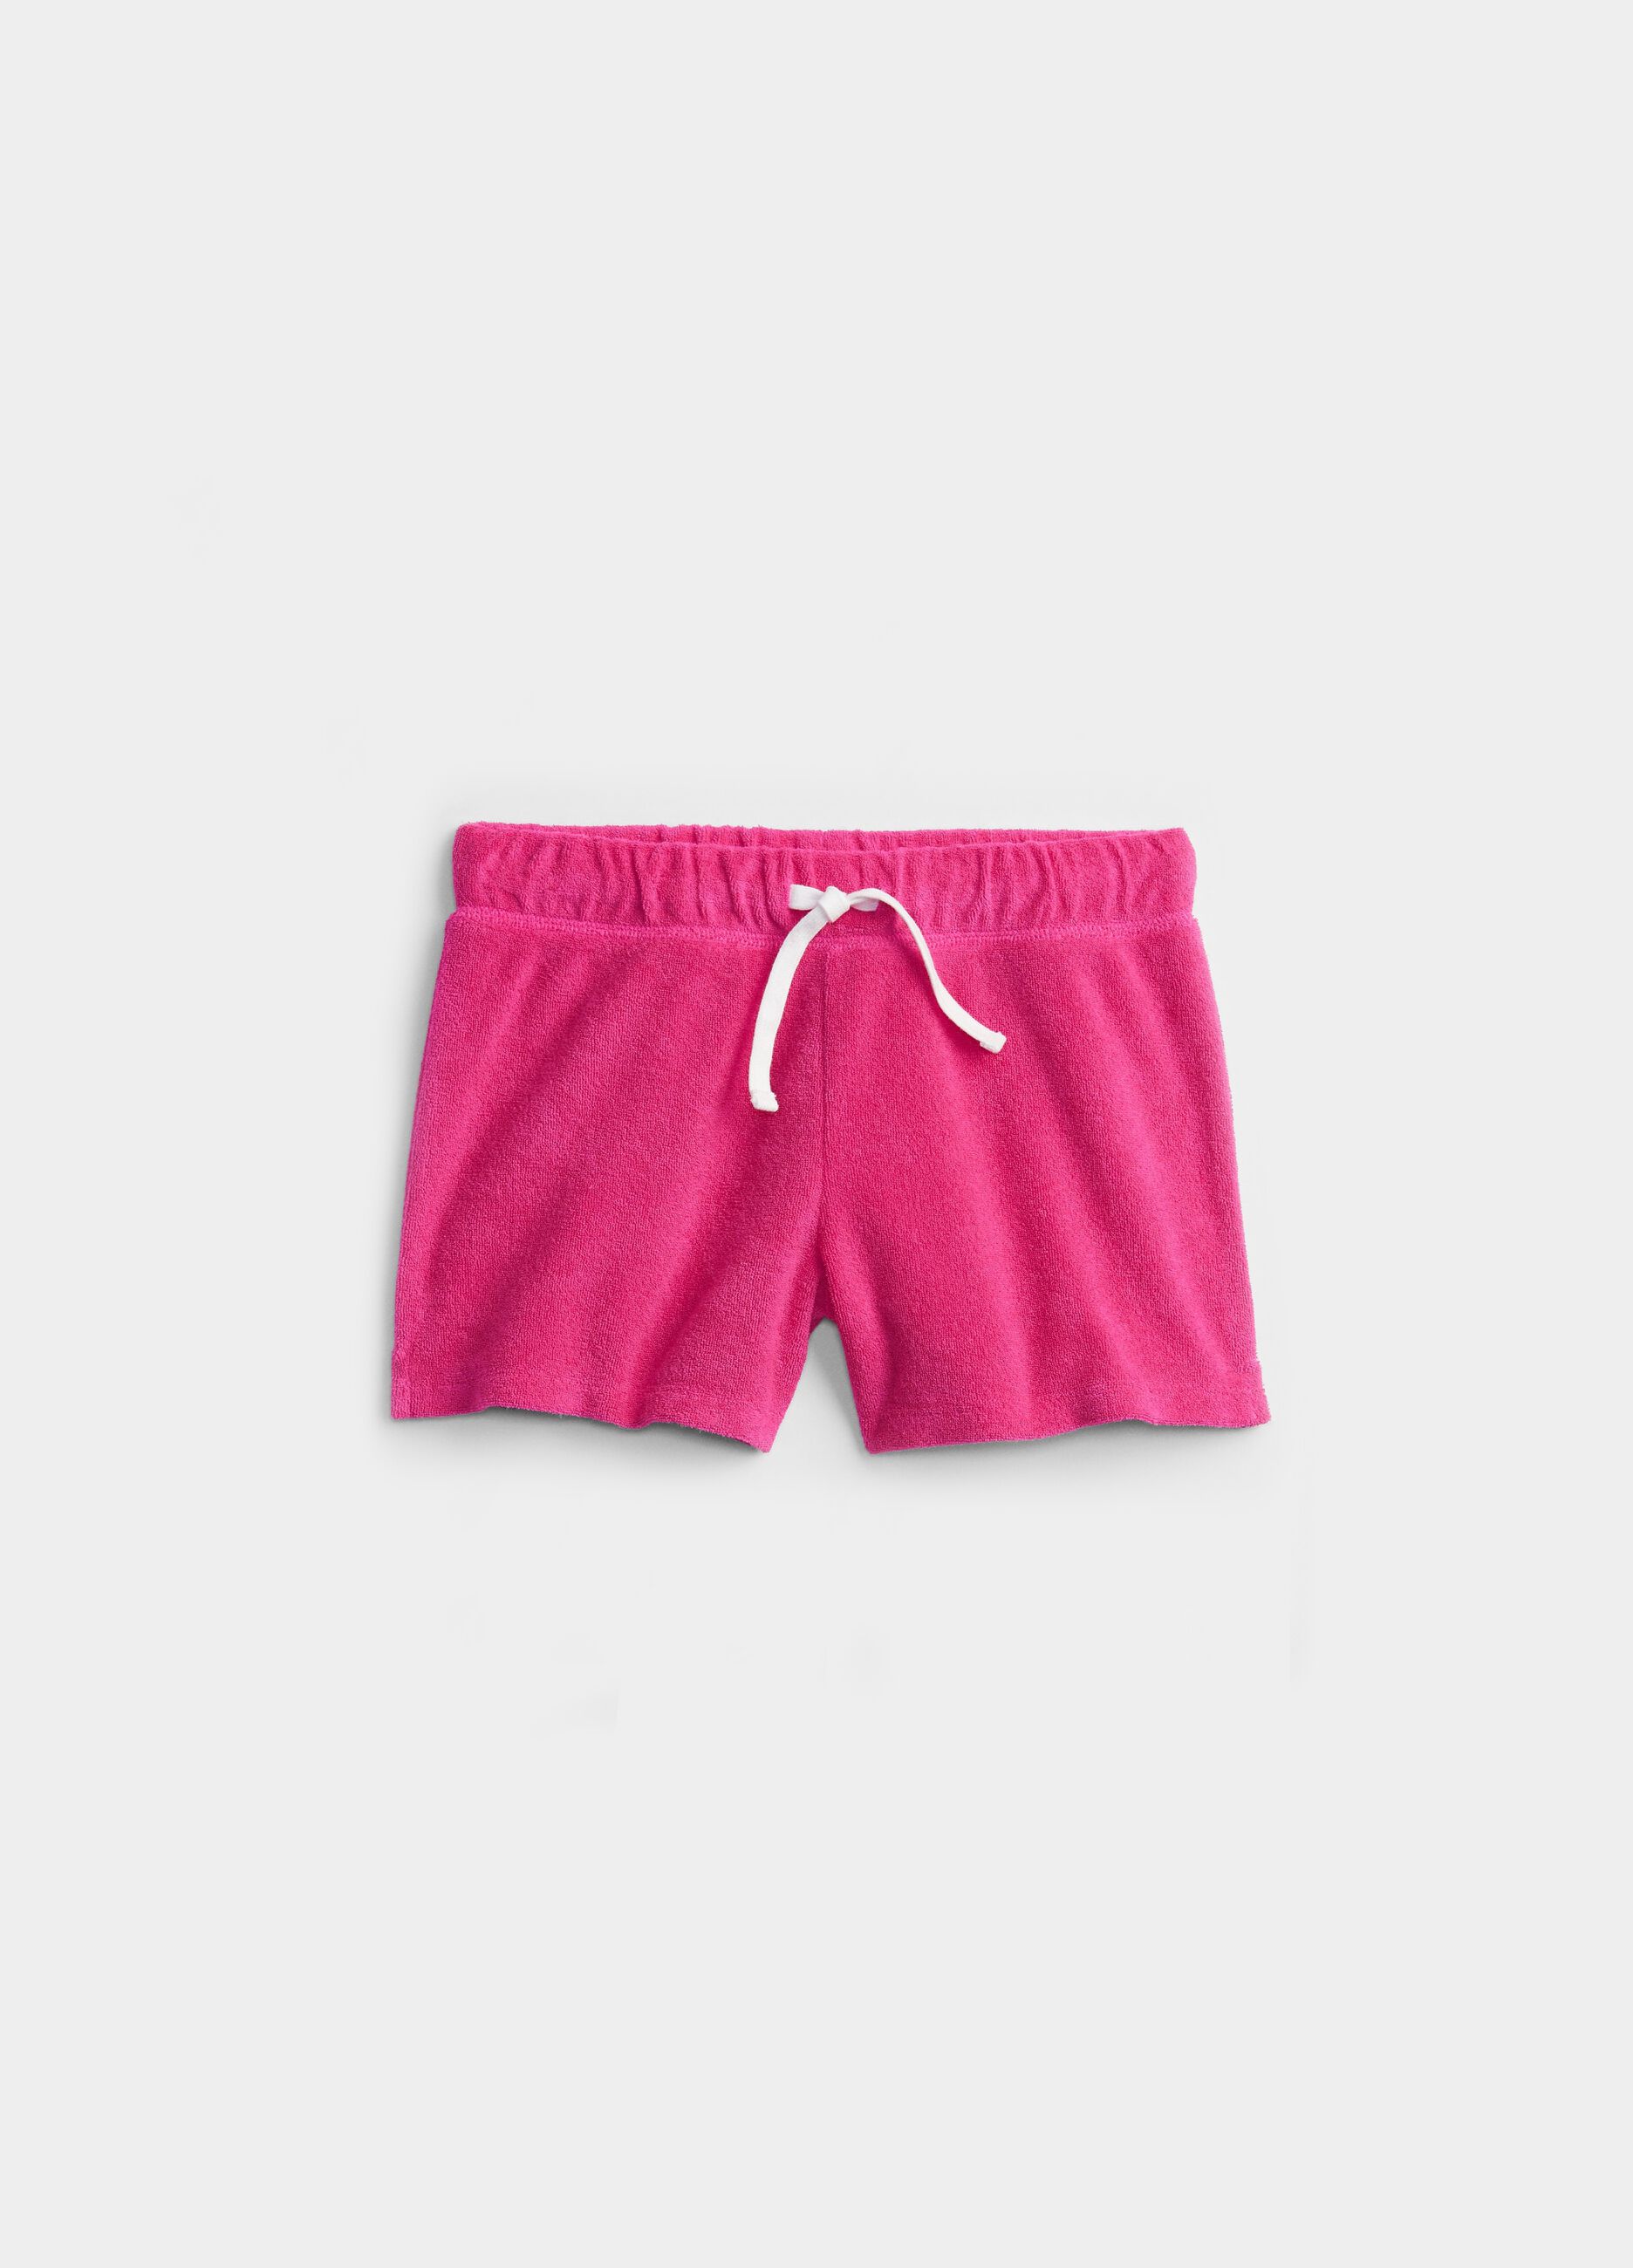 Terry shorts with drawstring